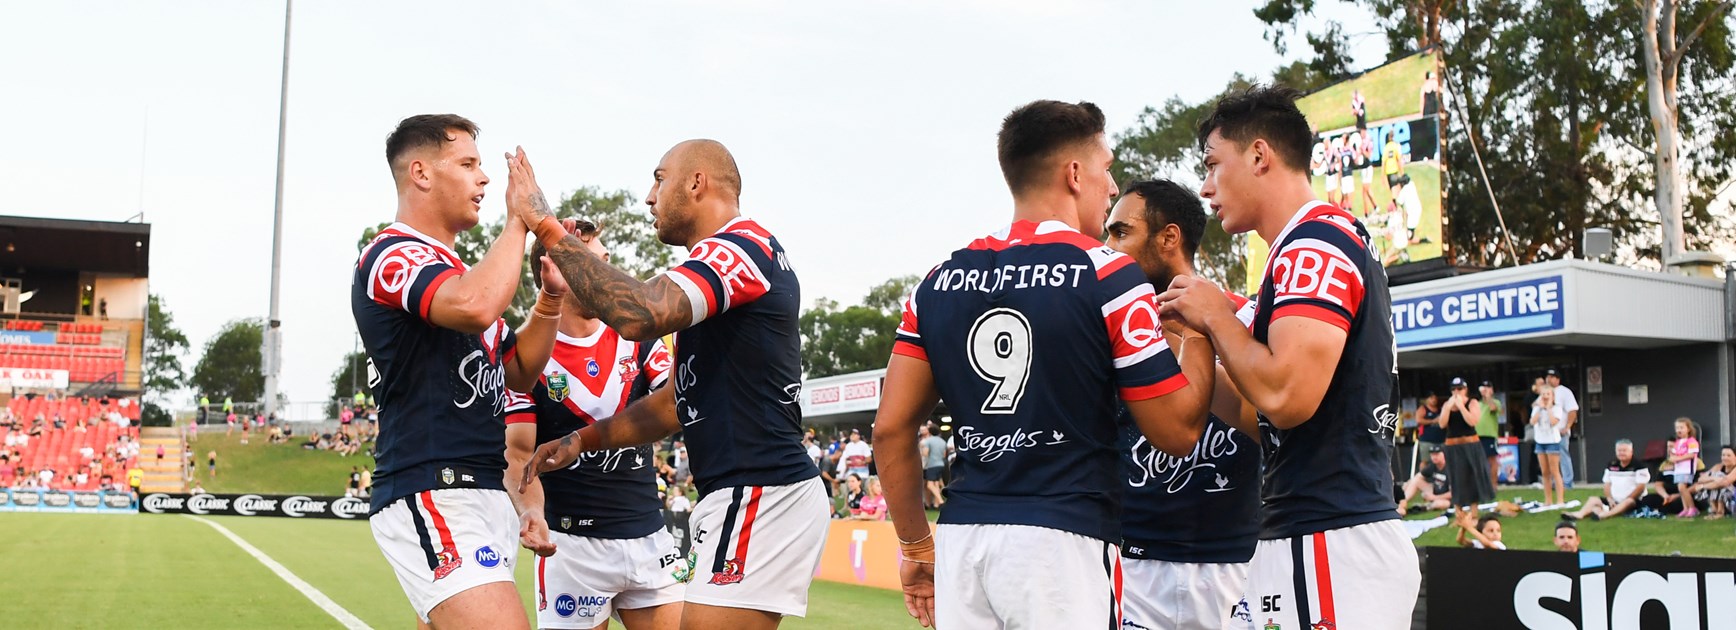 The Roosters celebrate a try against Penrith.